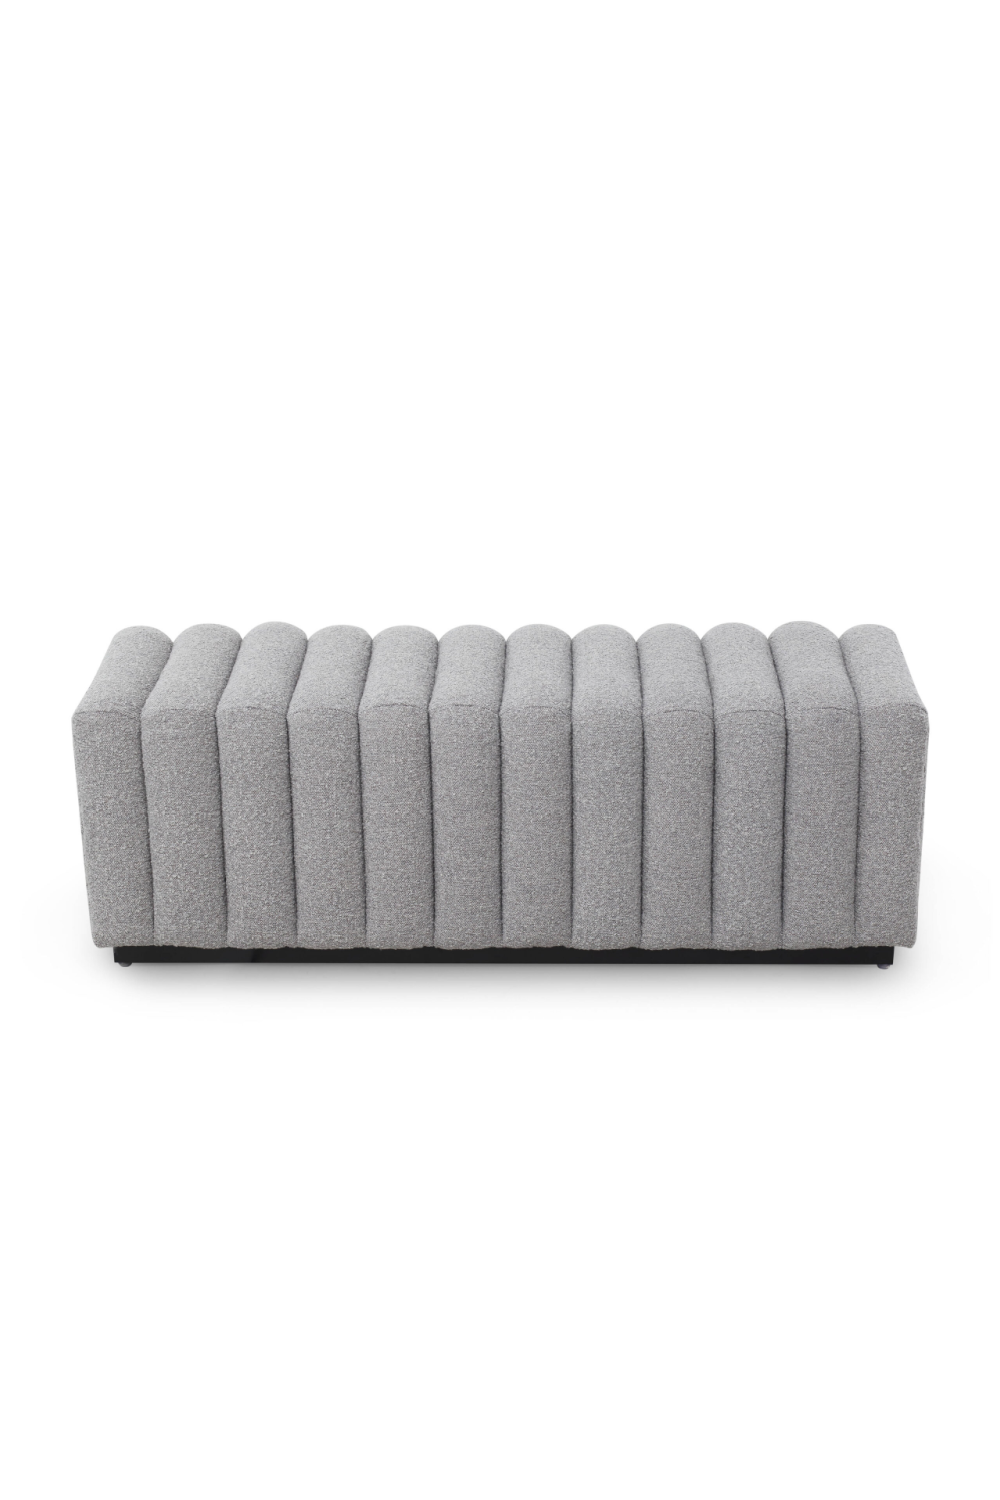 Channeled Seat Boucle Bench Liang &amp; Eimil Kalum White Liang &amp; Eimil - OROA